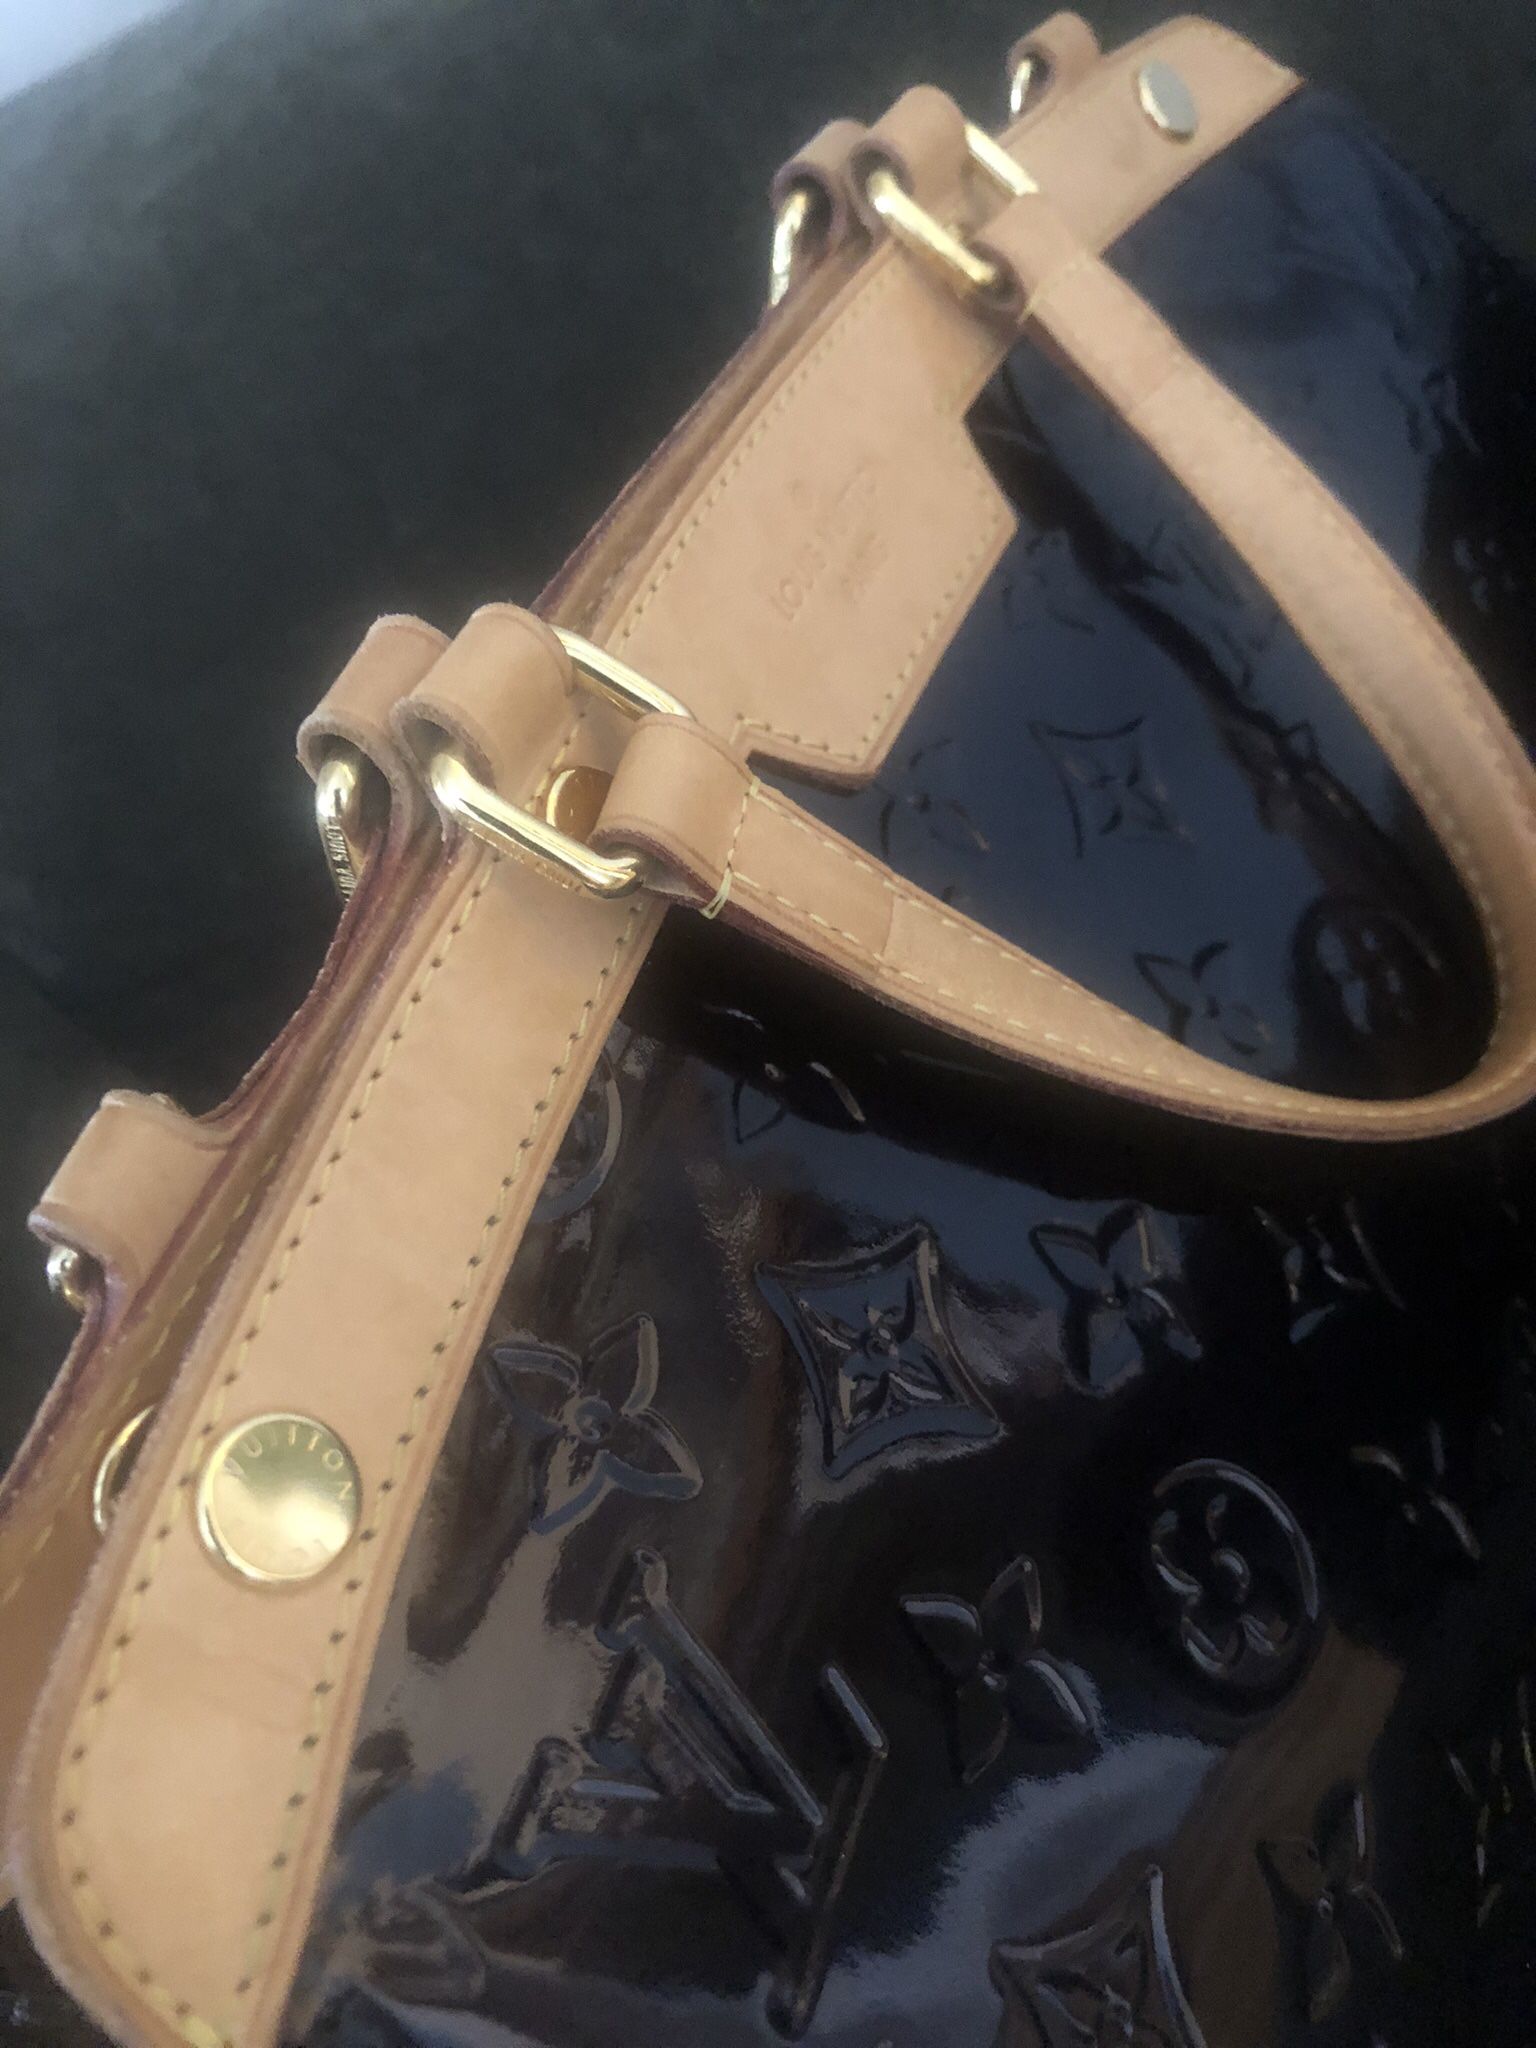 Authentic Matte Black LV Vernis Bag for Sale in West Islip, NY - OfferUp